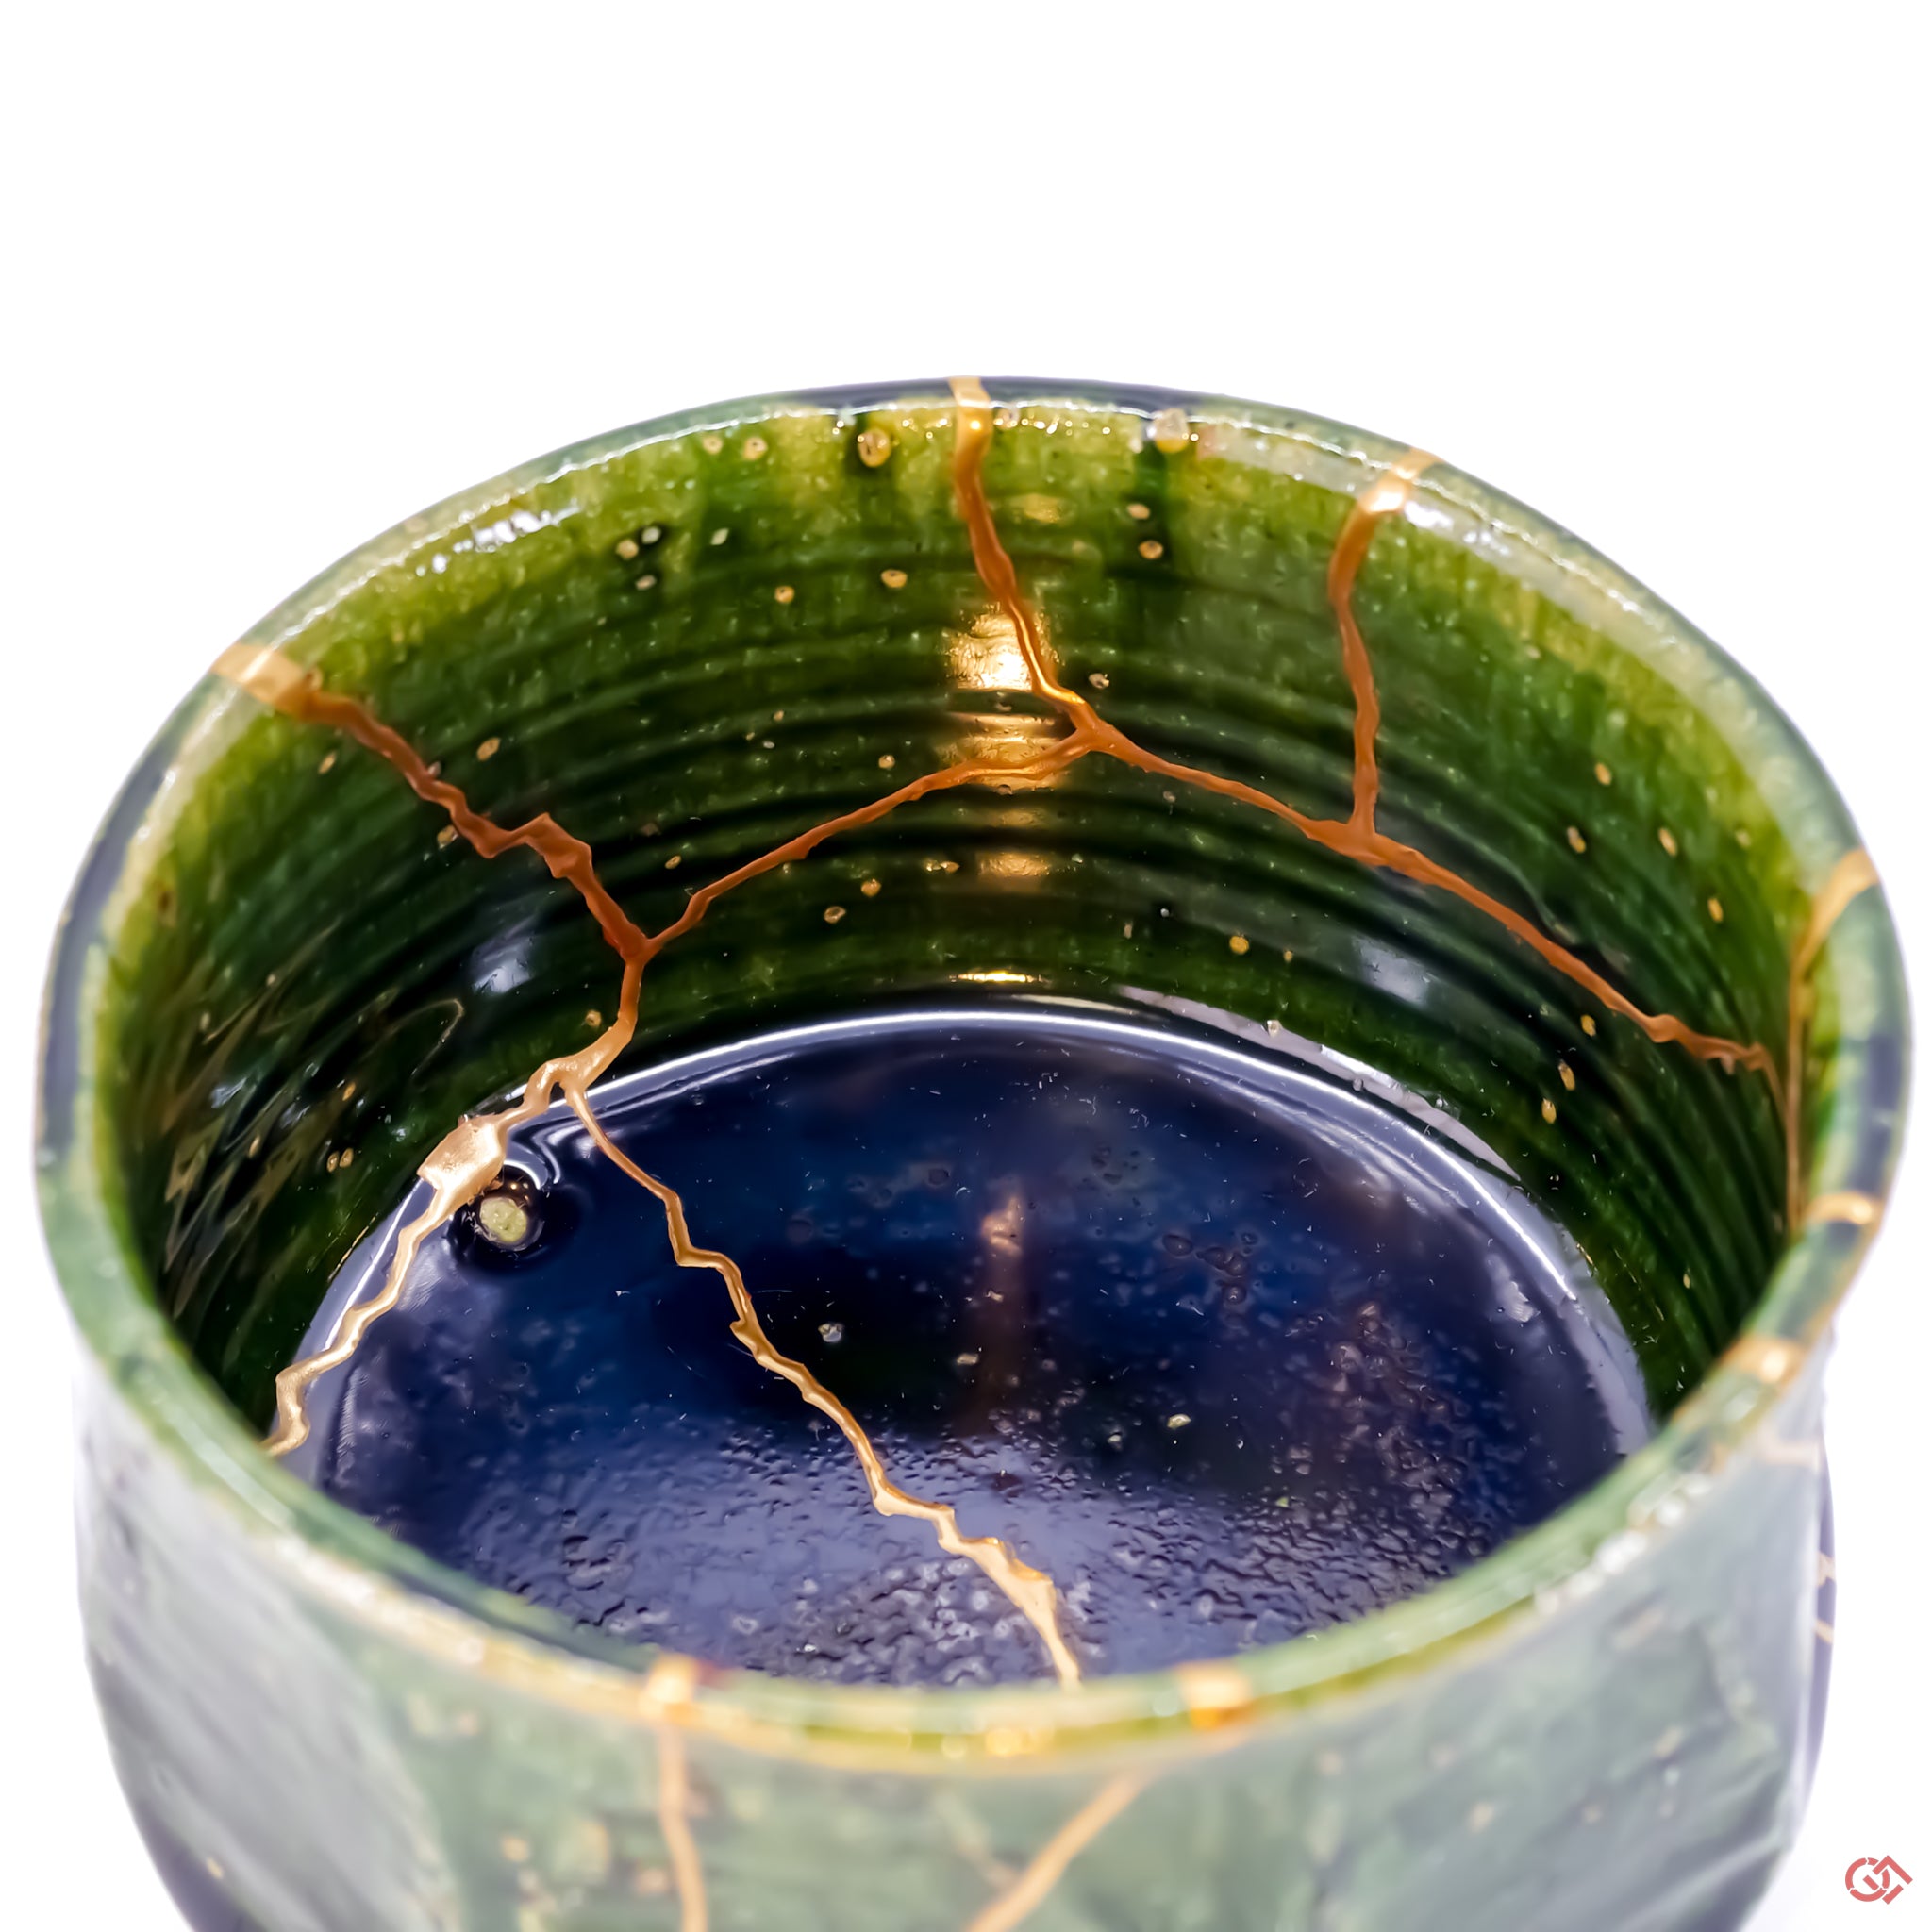 Golden veins of resilience dance across this handcrafted Kintsugi bowl, each crack a unique story waiting to be told.